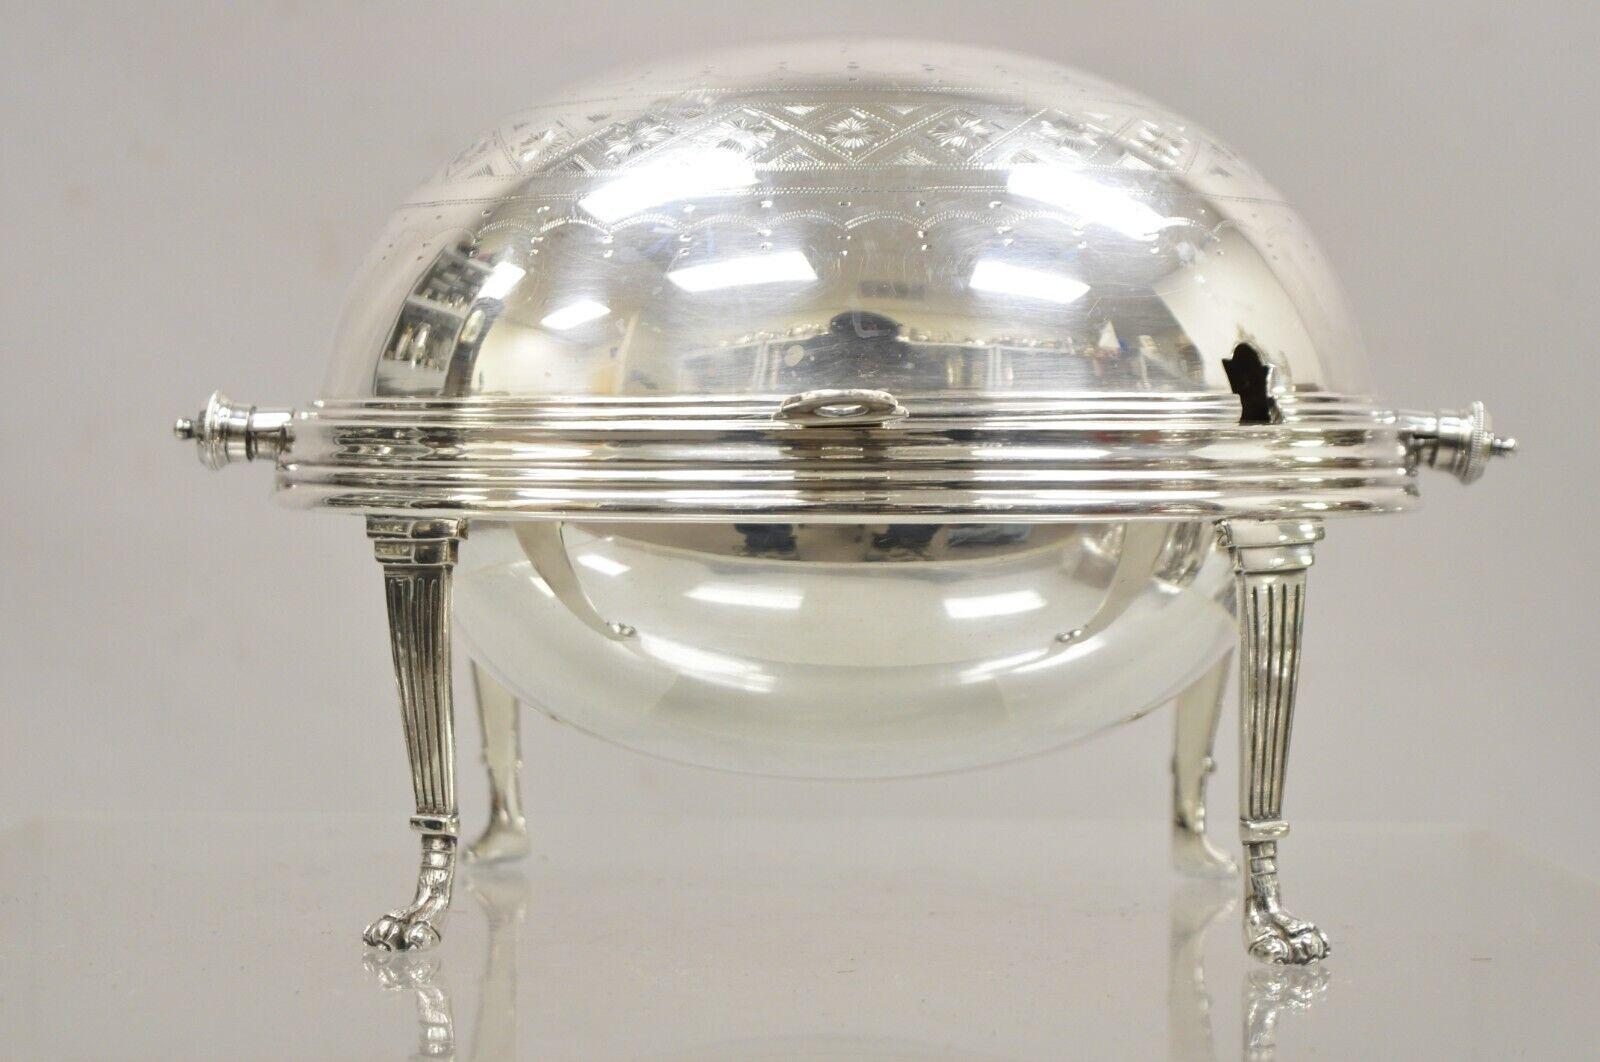 English Regency Victorian Silver Plated Revolving Dome Chafing Dish Warmer For Sale 7